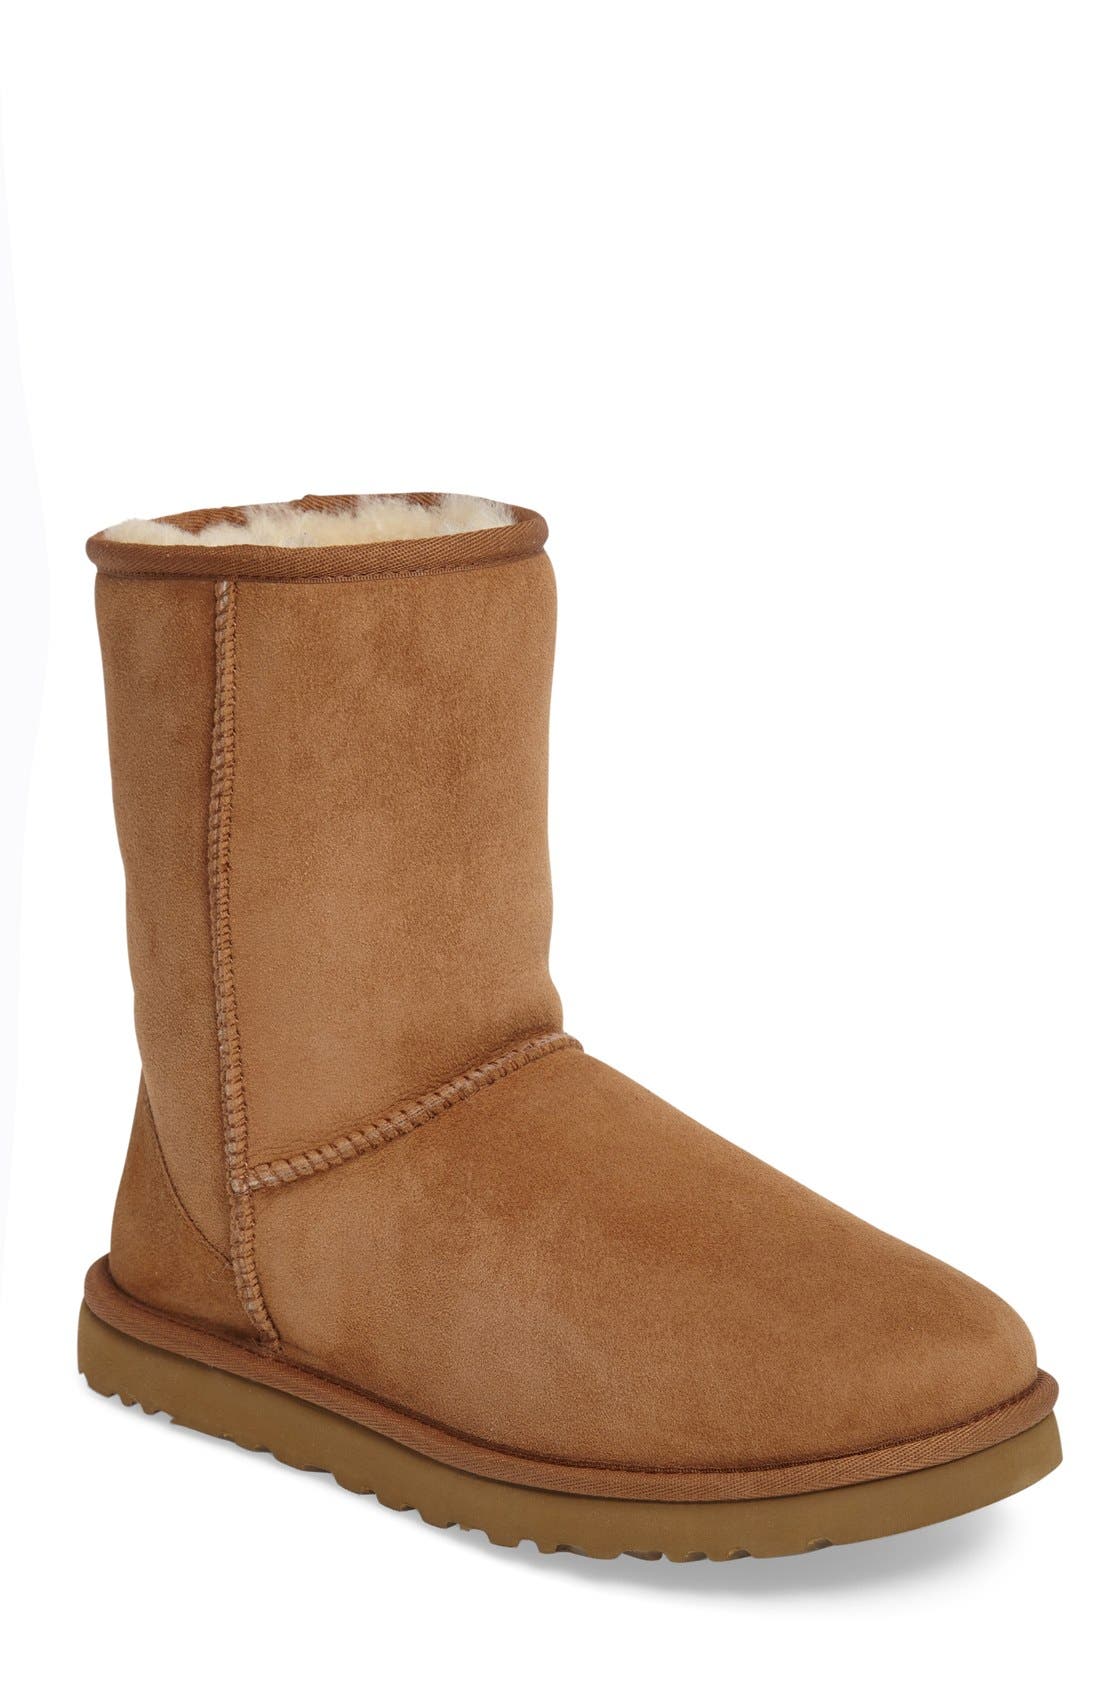 mens uggs winter boots